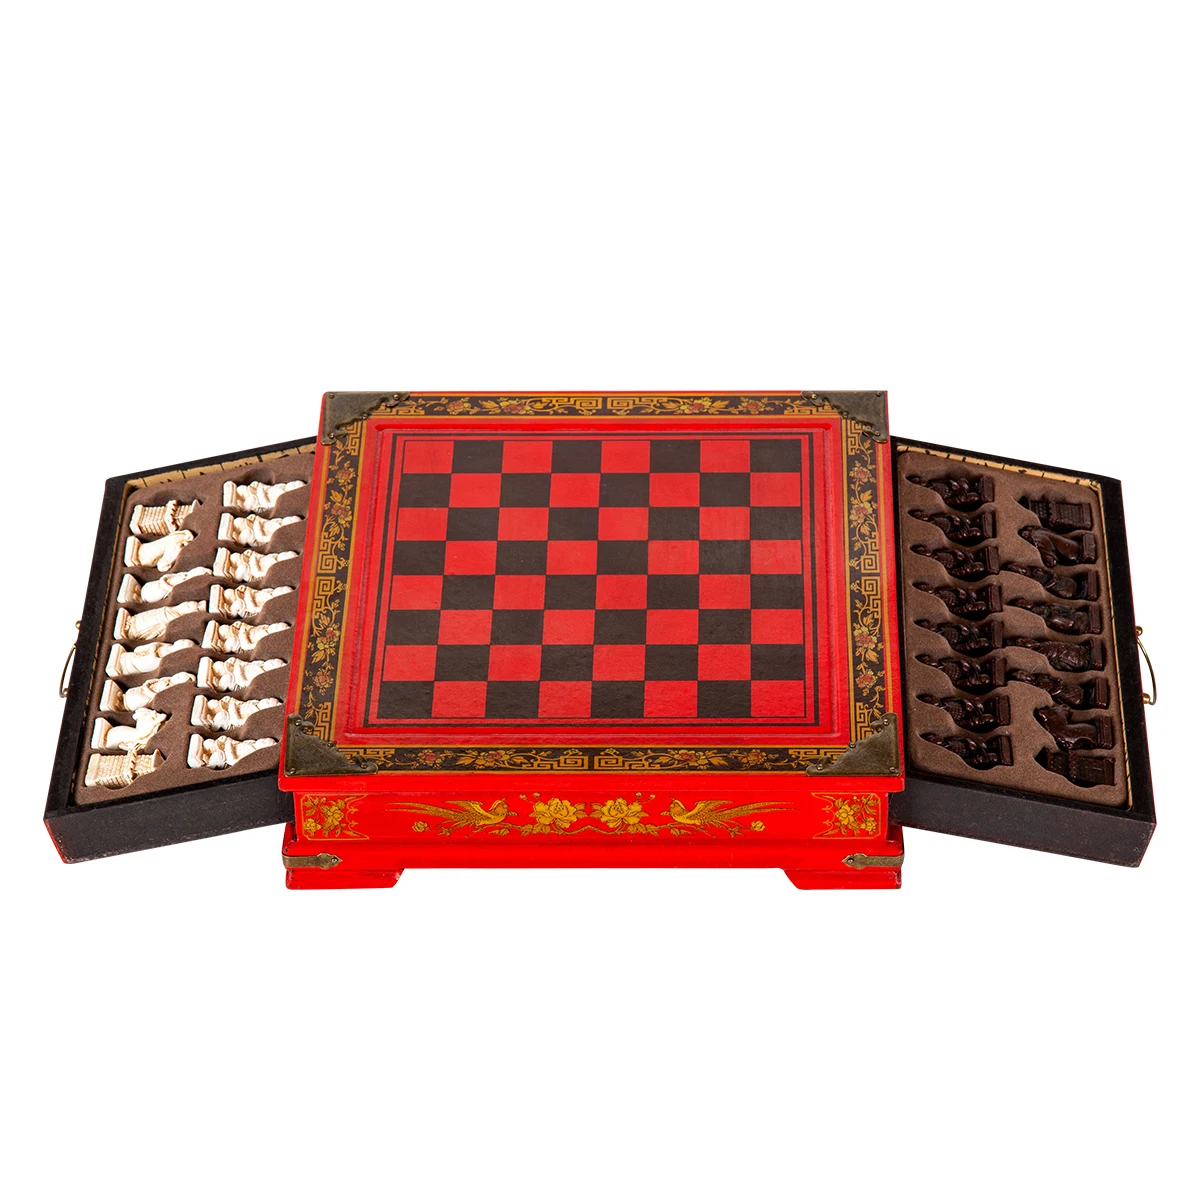 

Retro Chess Set Board Games Resin Chess Terracotta Warriors Lifelike Pieces High-density Board Paste 26*26*6.5cm/10.24*2.56in